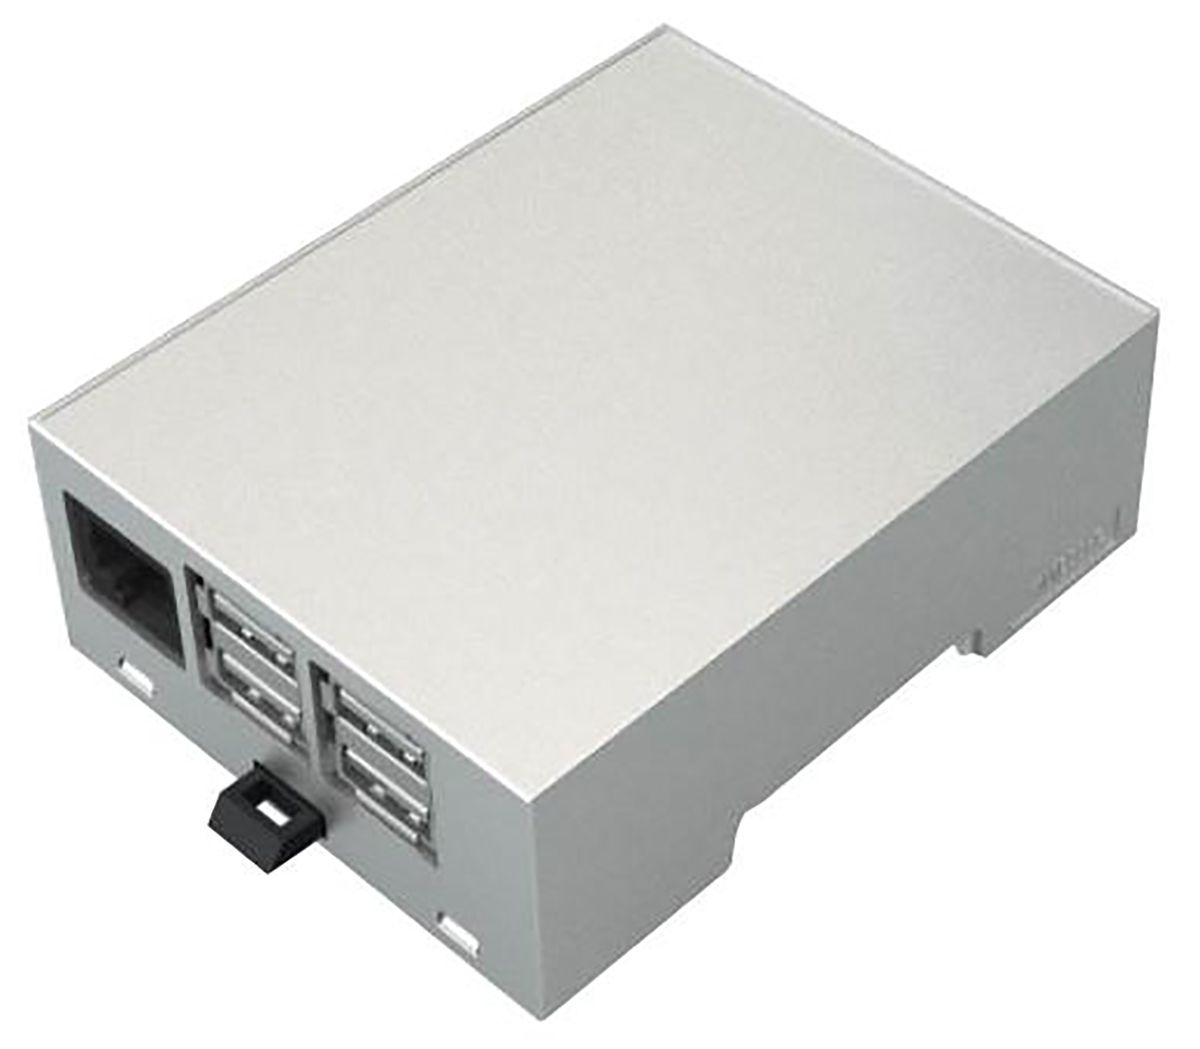 Italtronic ABS, Polycarbonate Case for use with Raspberry Pi 2B, Raspberry Pi B+ in Grey